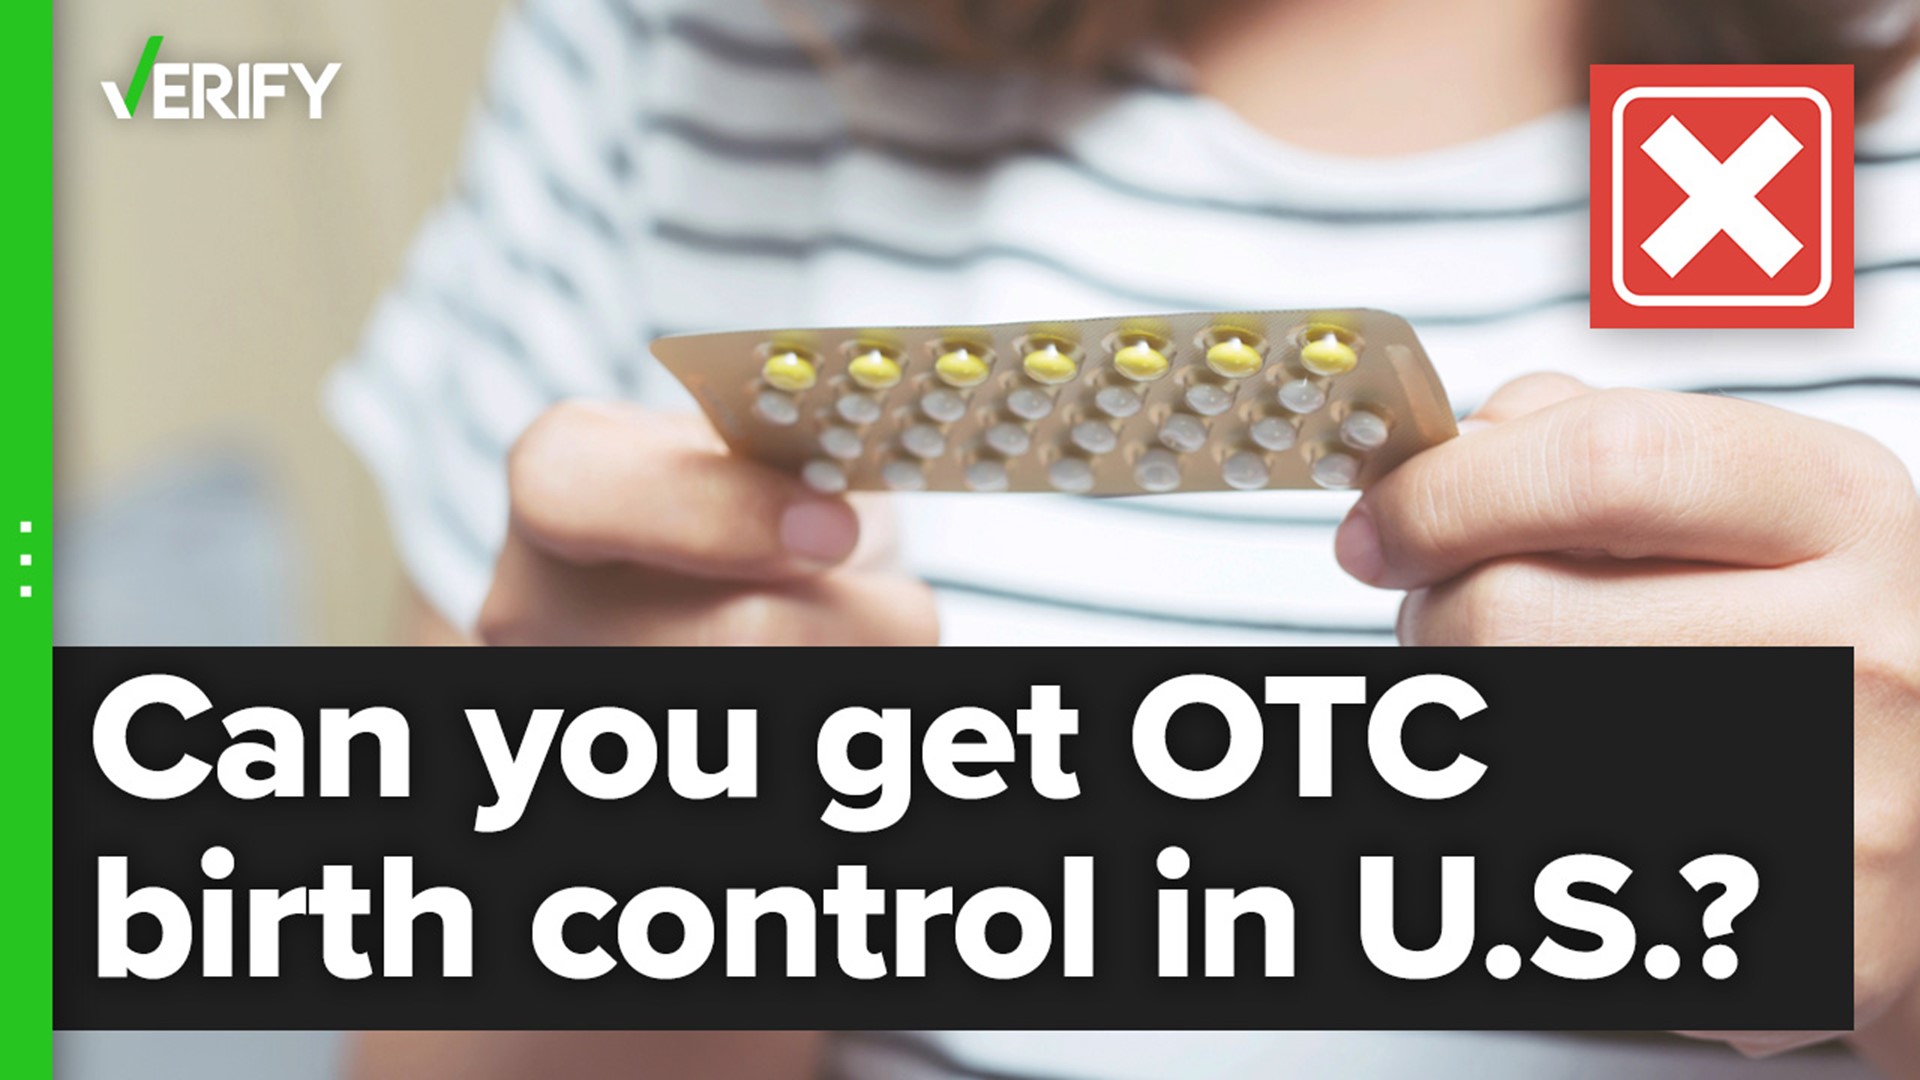 HRA Pharma is seeking FDA approval for the first birth control pill that people could buy without a prescription in the U.S.